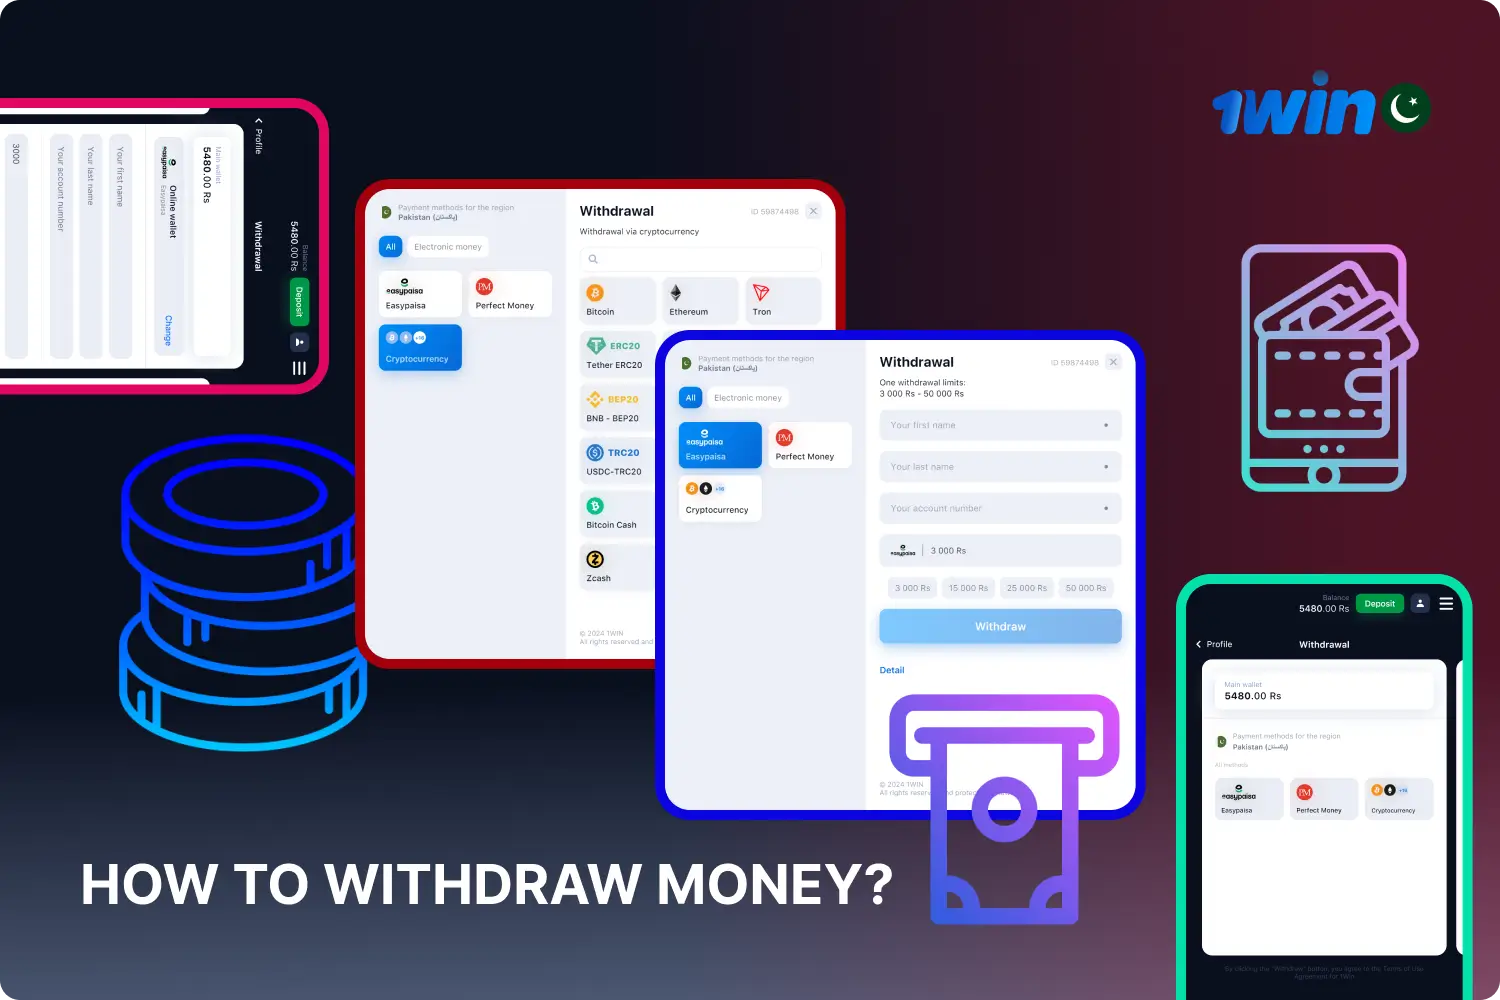 Users of the 1win platform in Pakistan can easily and quickly withdraw their winnings using any of the available payment systems